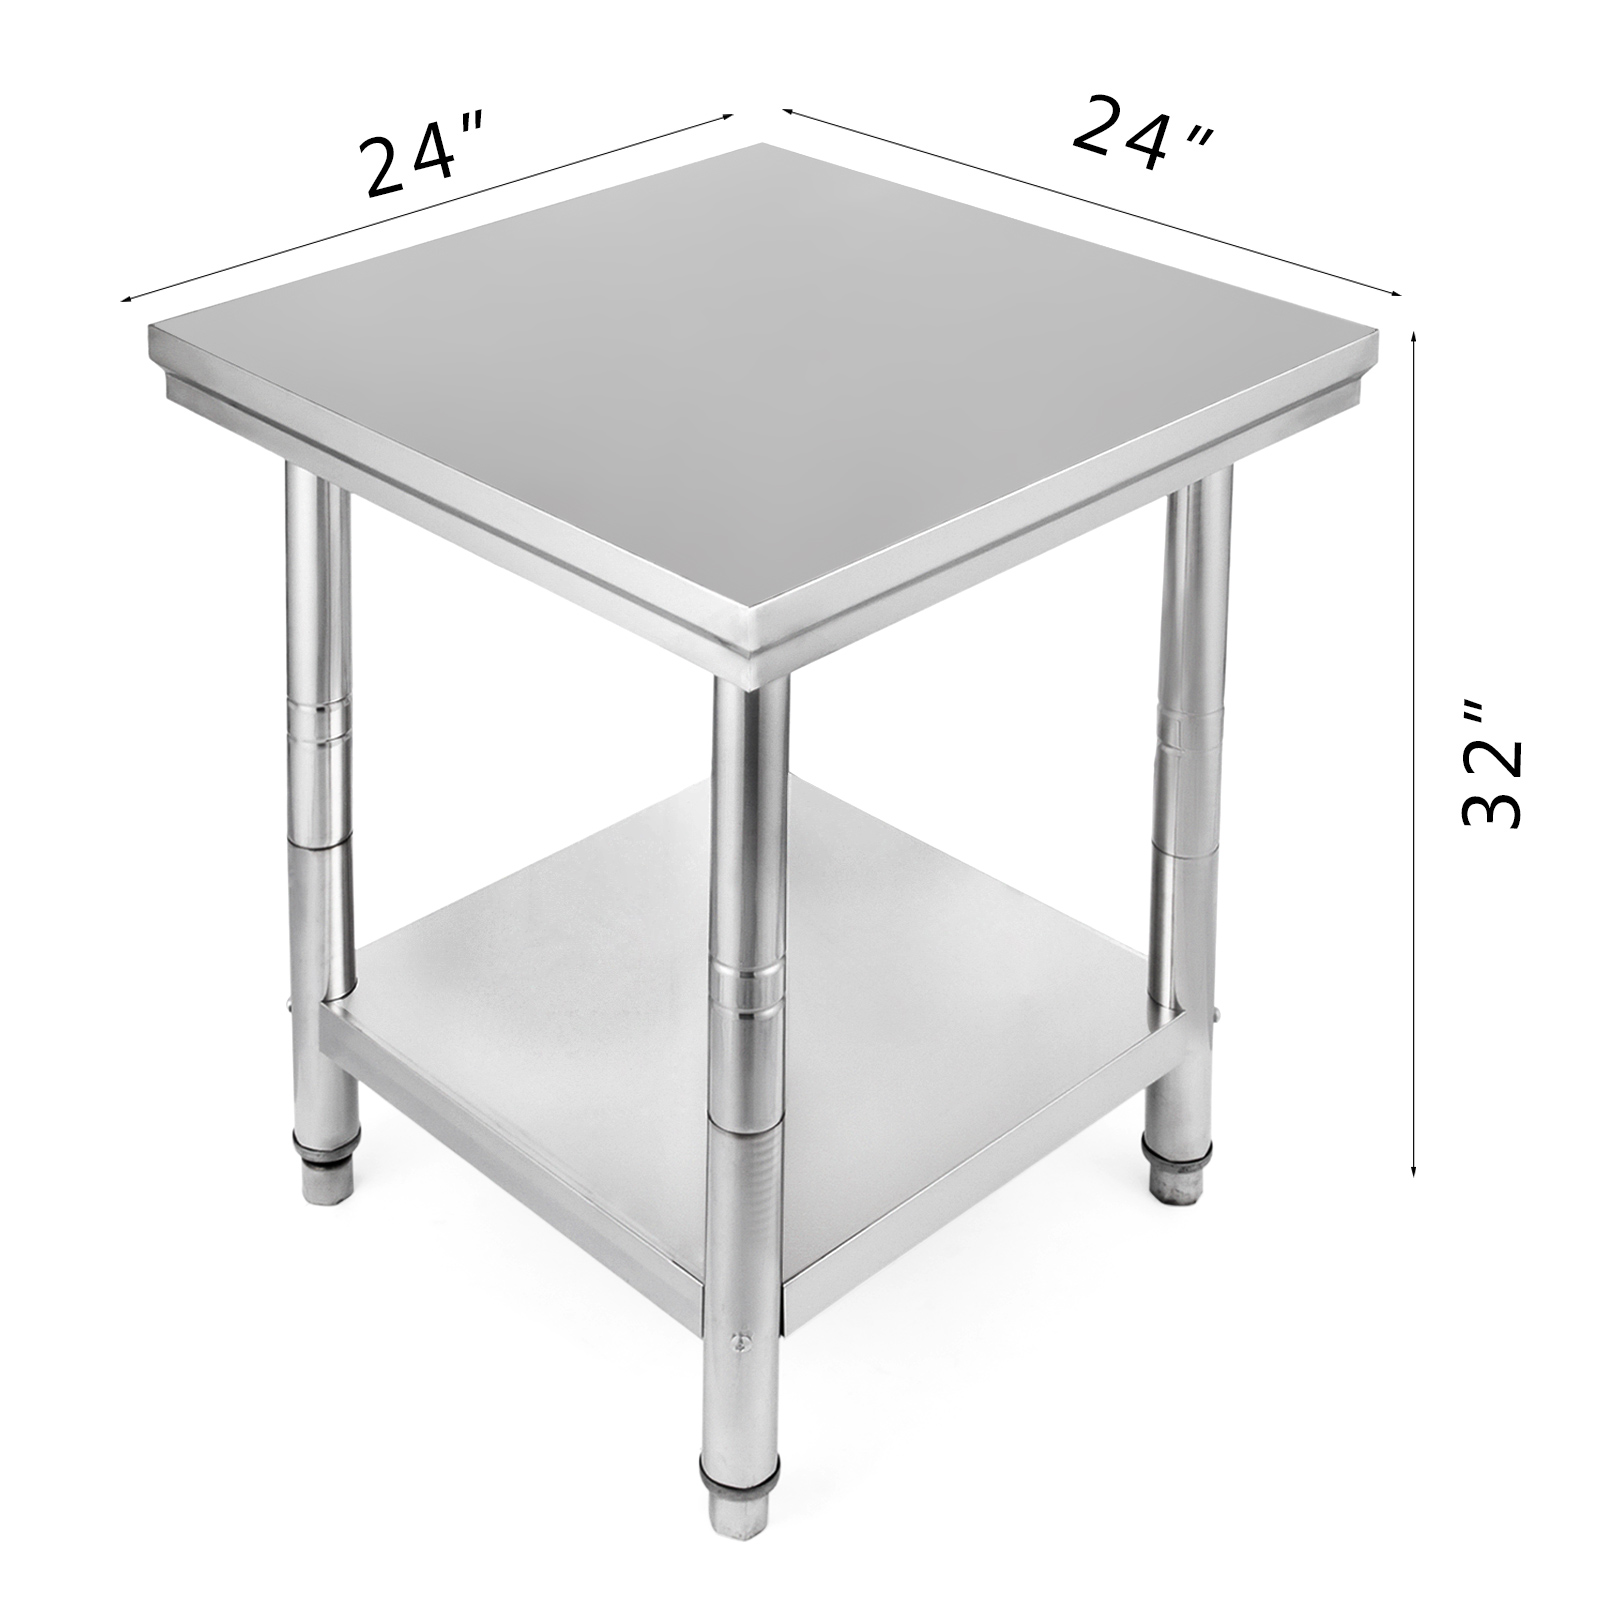 Stainless Steel Catering Table Work Bench Kitchen Back 